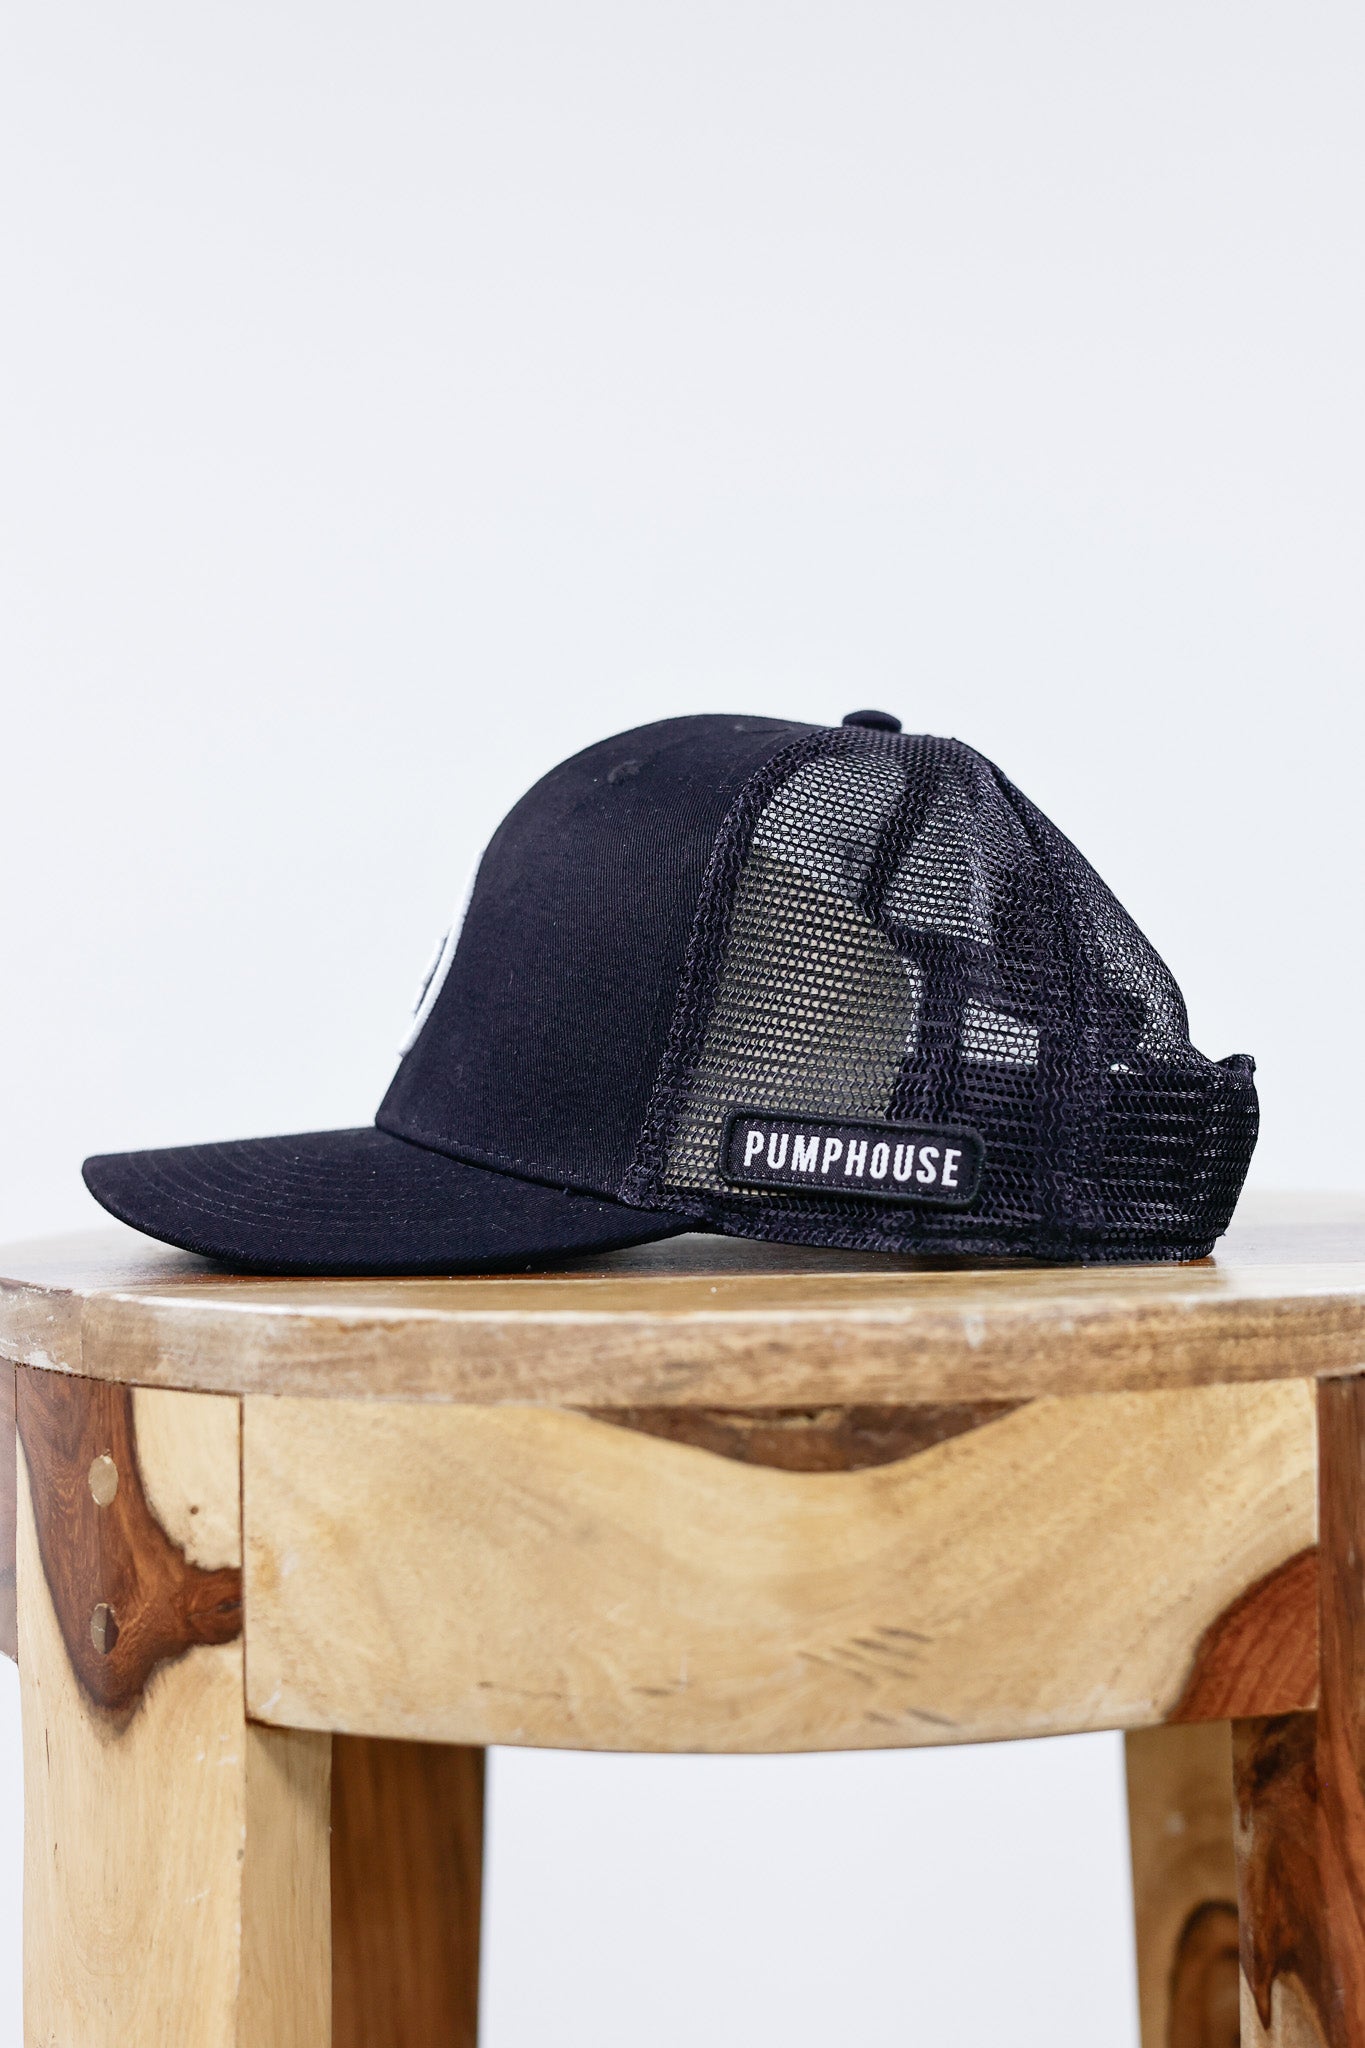 Black Out - Pumphouse Embroidered Trucker Hat